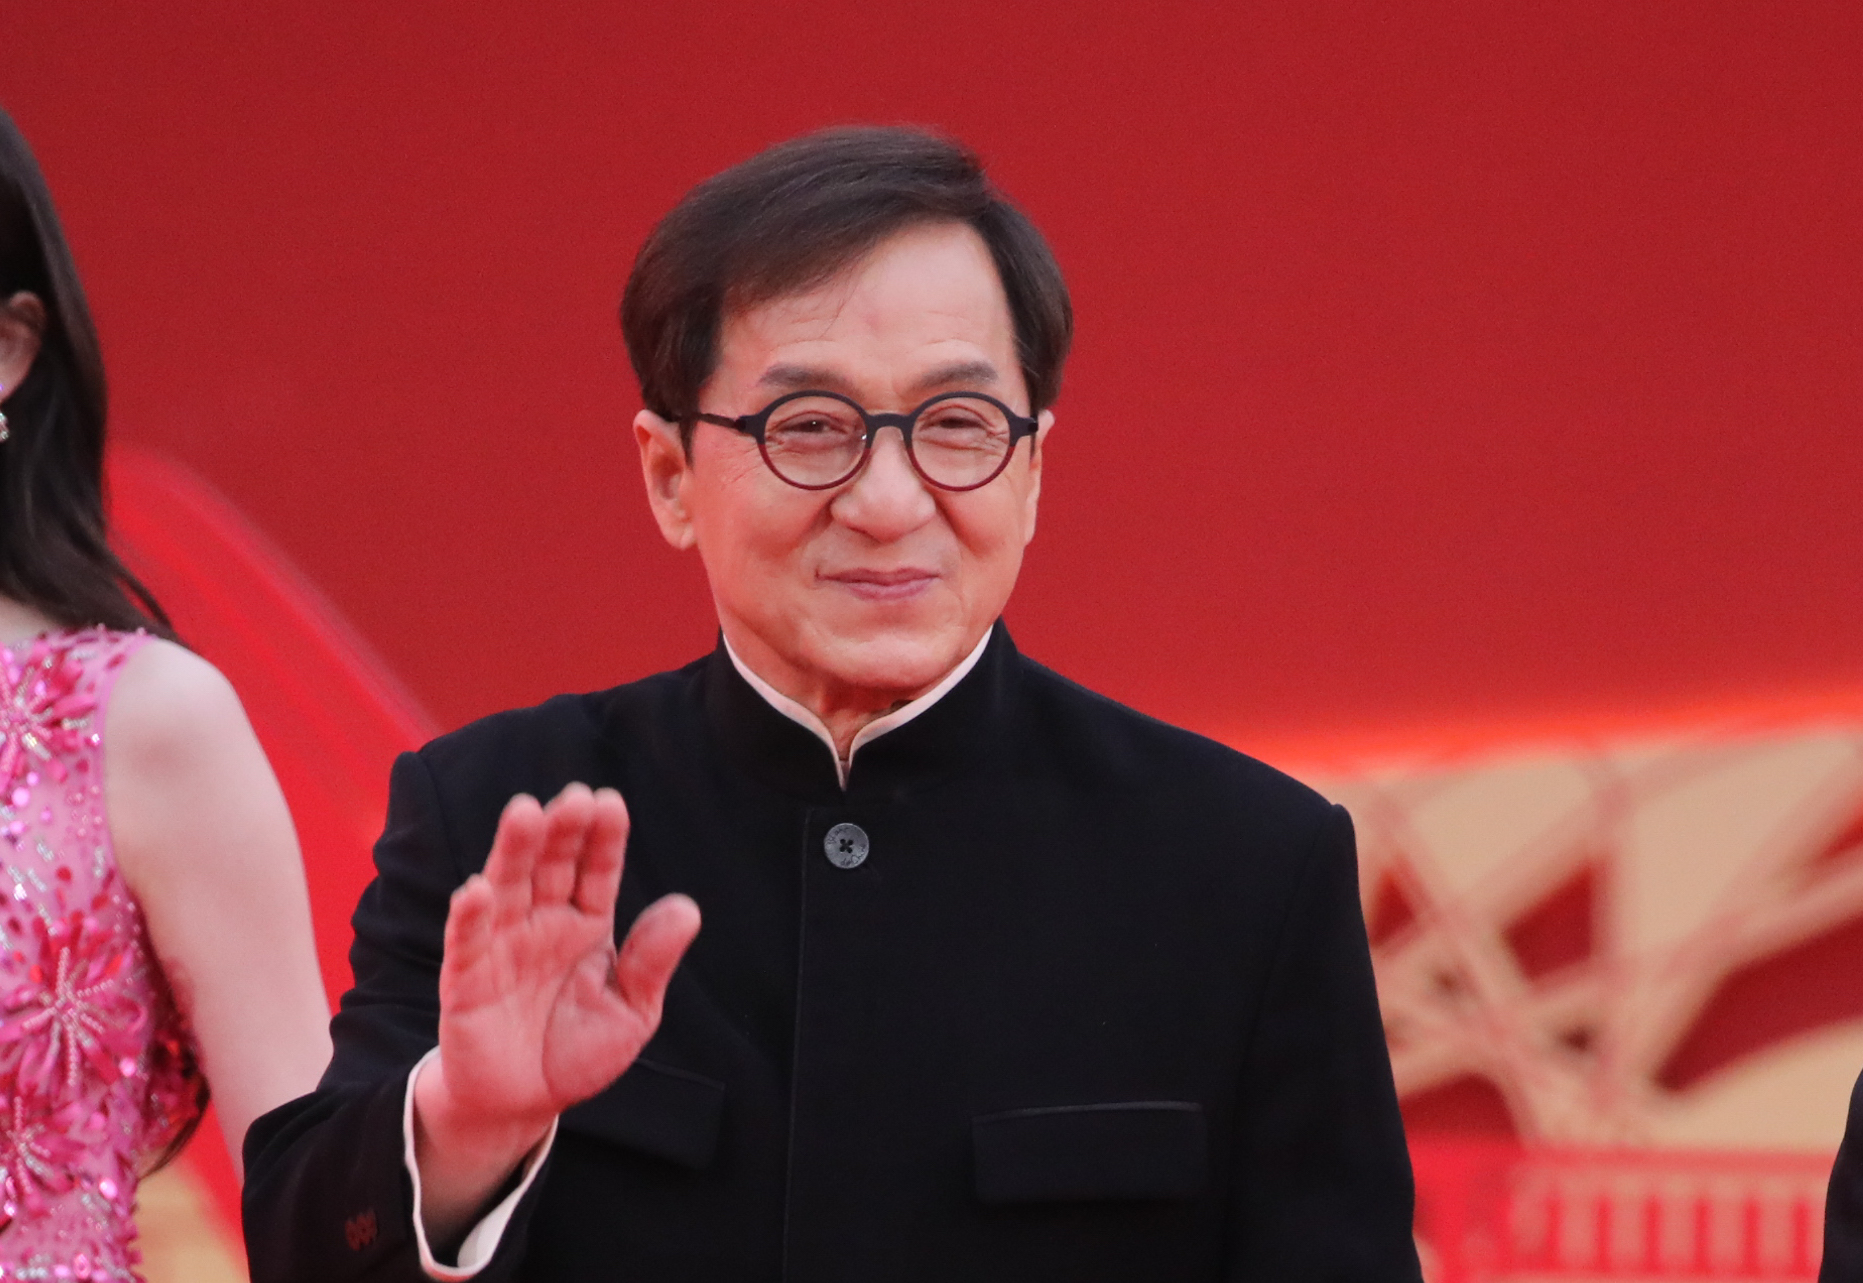 Jackie Chan Addresses Fans’ Worries About His Recent Aging Appearance